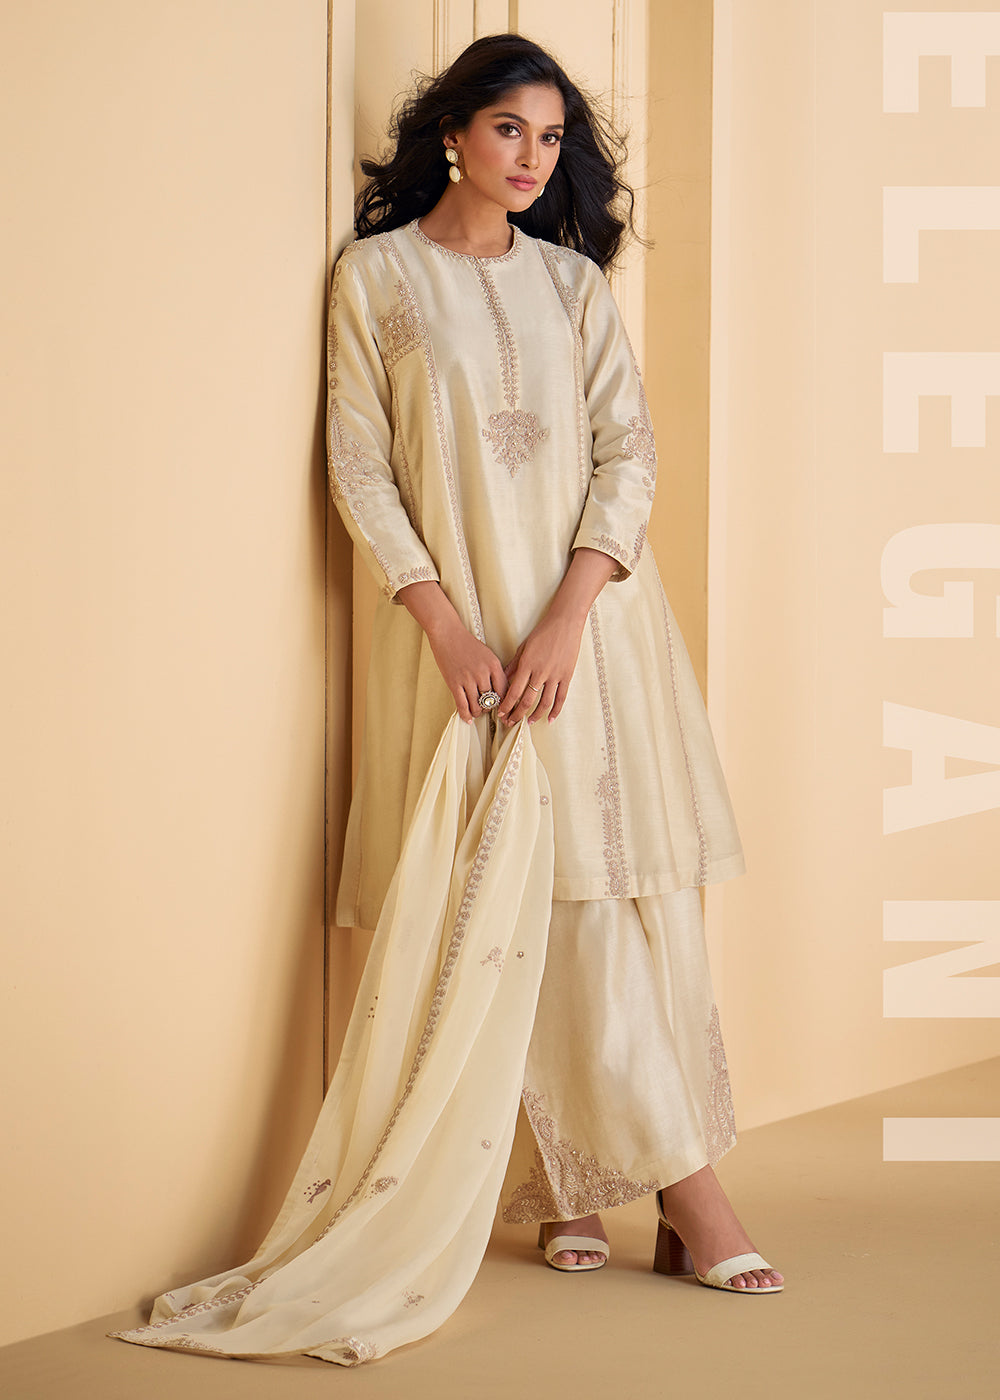 Buy Now Pure Real Silk White Embroidered Palazzo Style Suit Online in USA, UK, Canada, Germany, Australia & Worldwide at Empress Clothing.